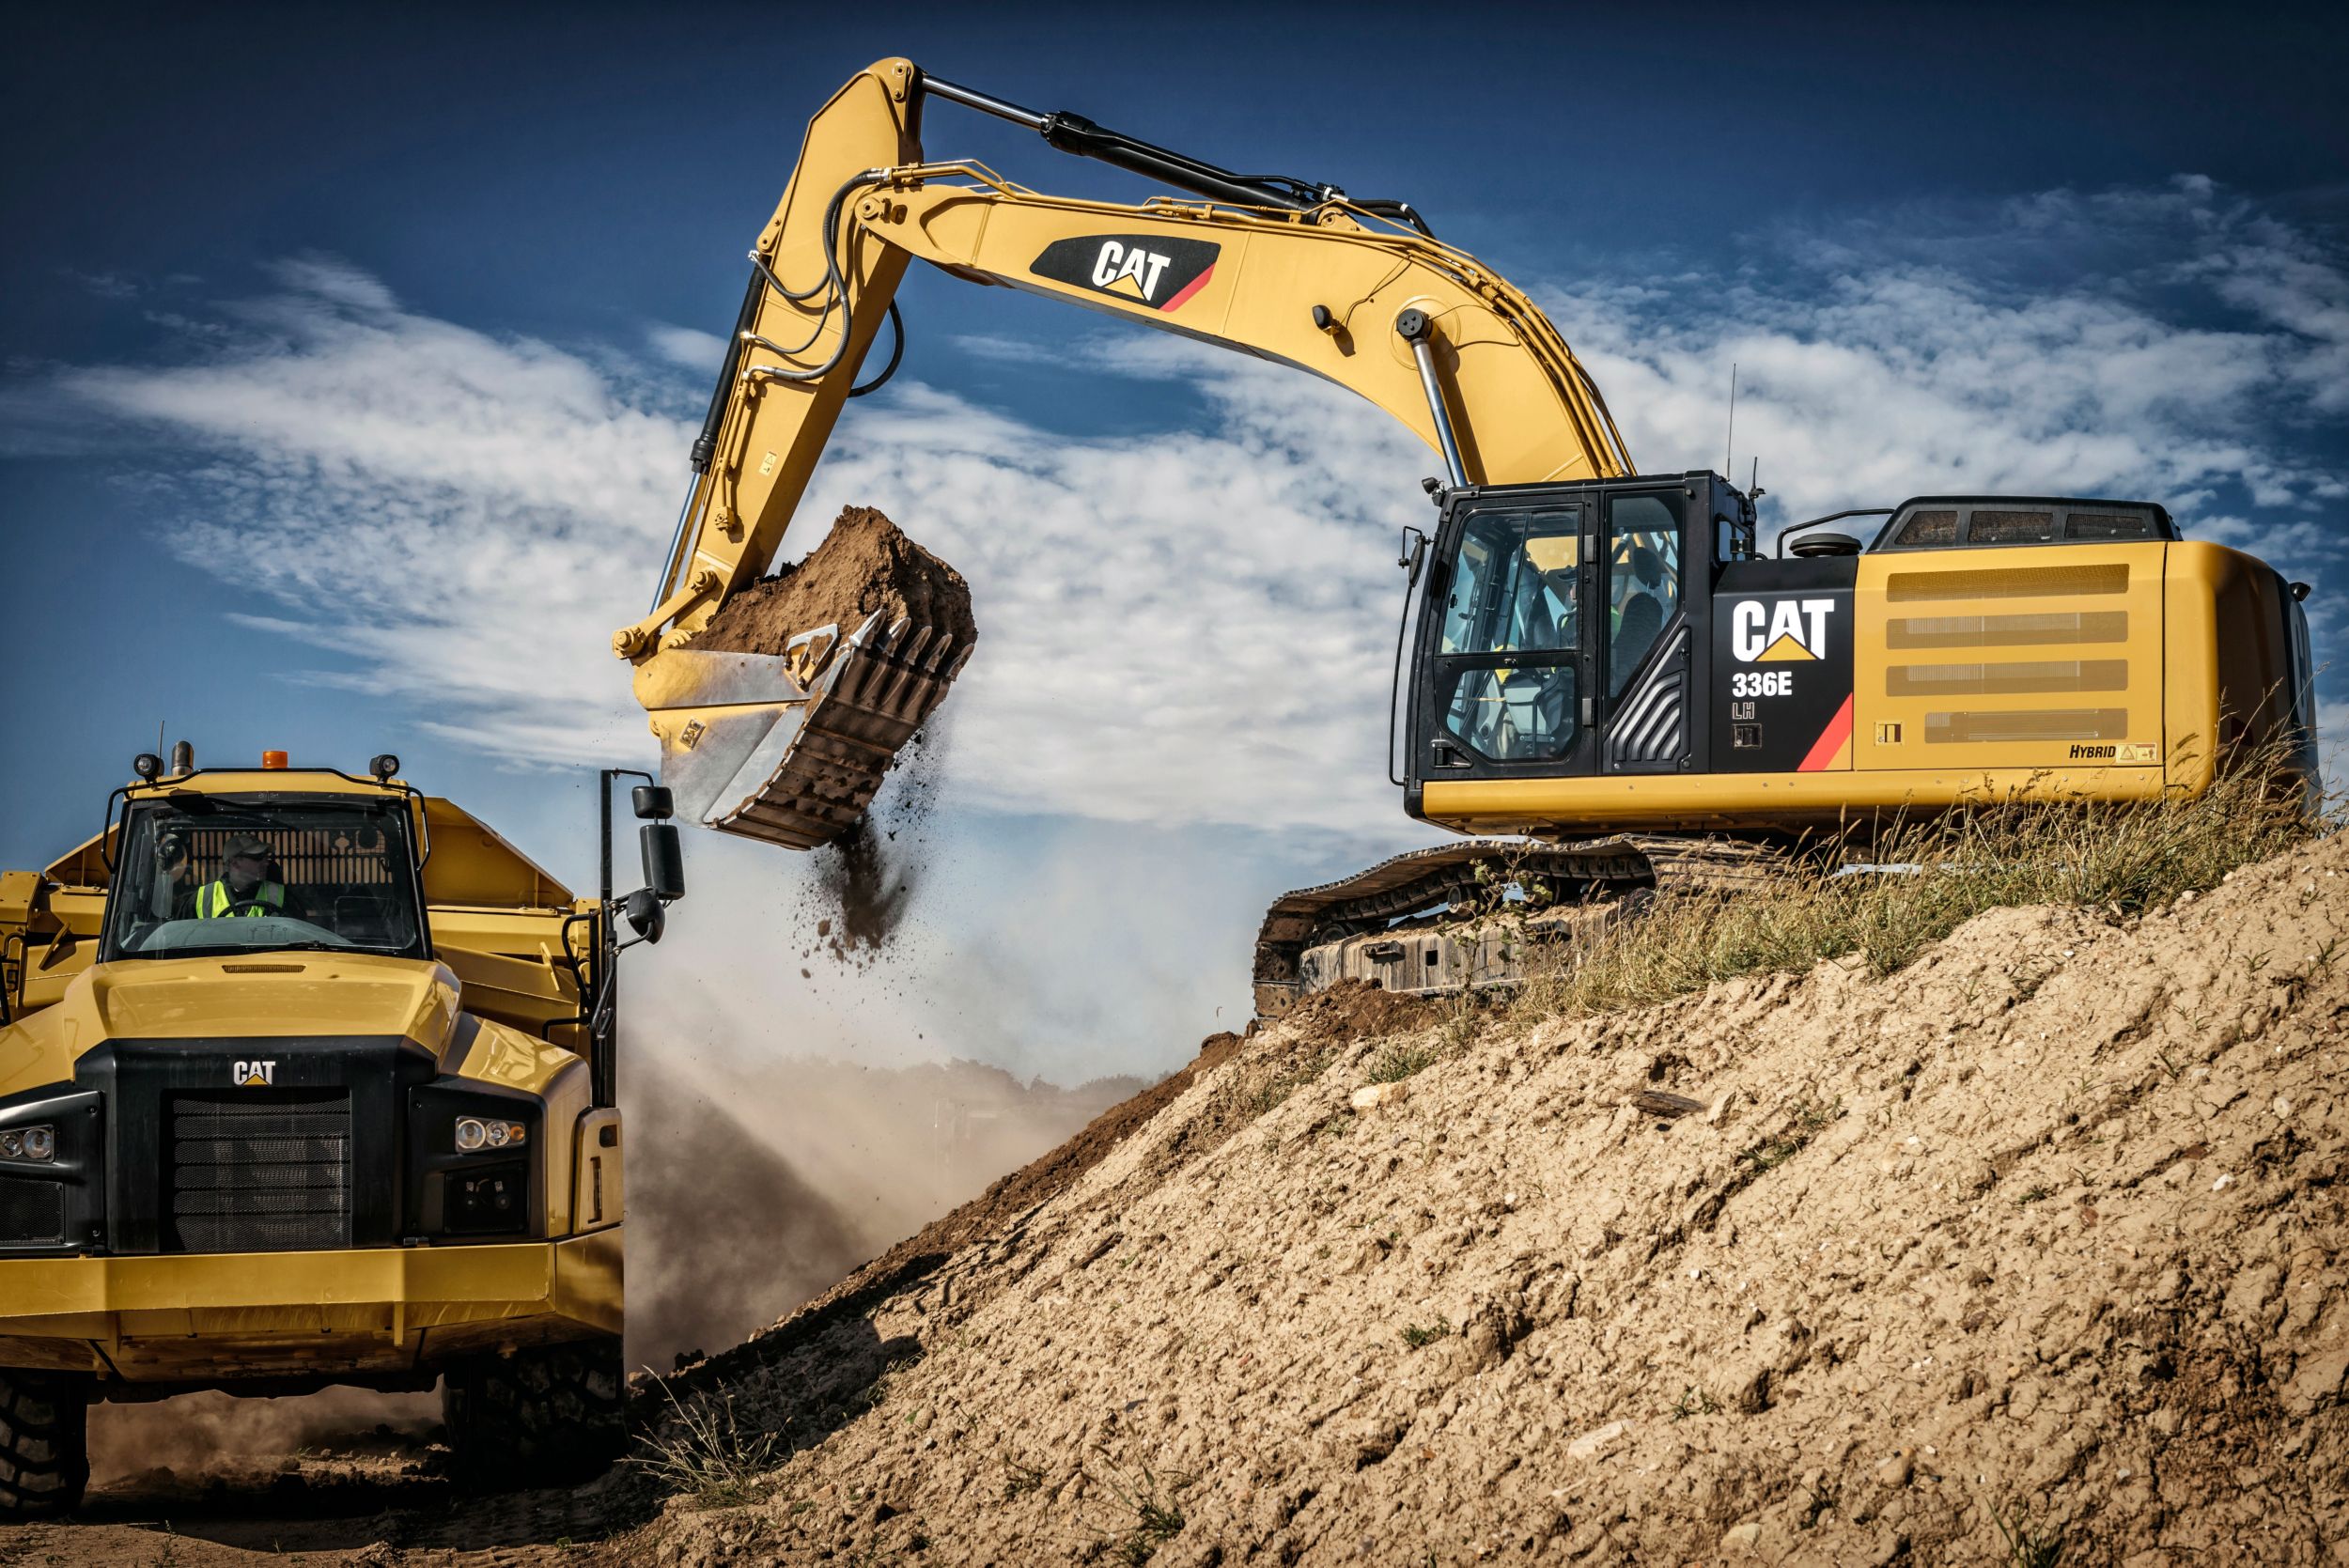 Caterpillar  Cat® Products, Parts, Services, Technology and